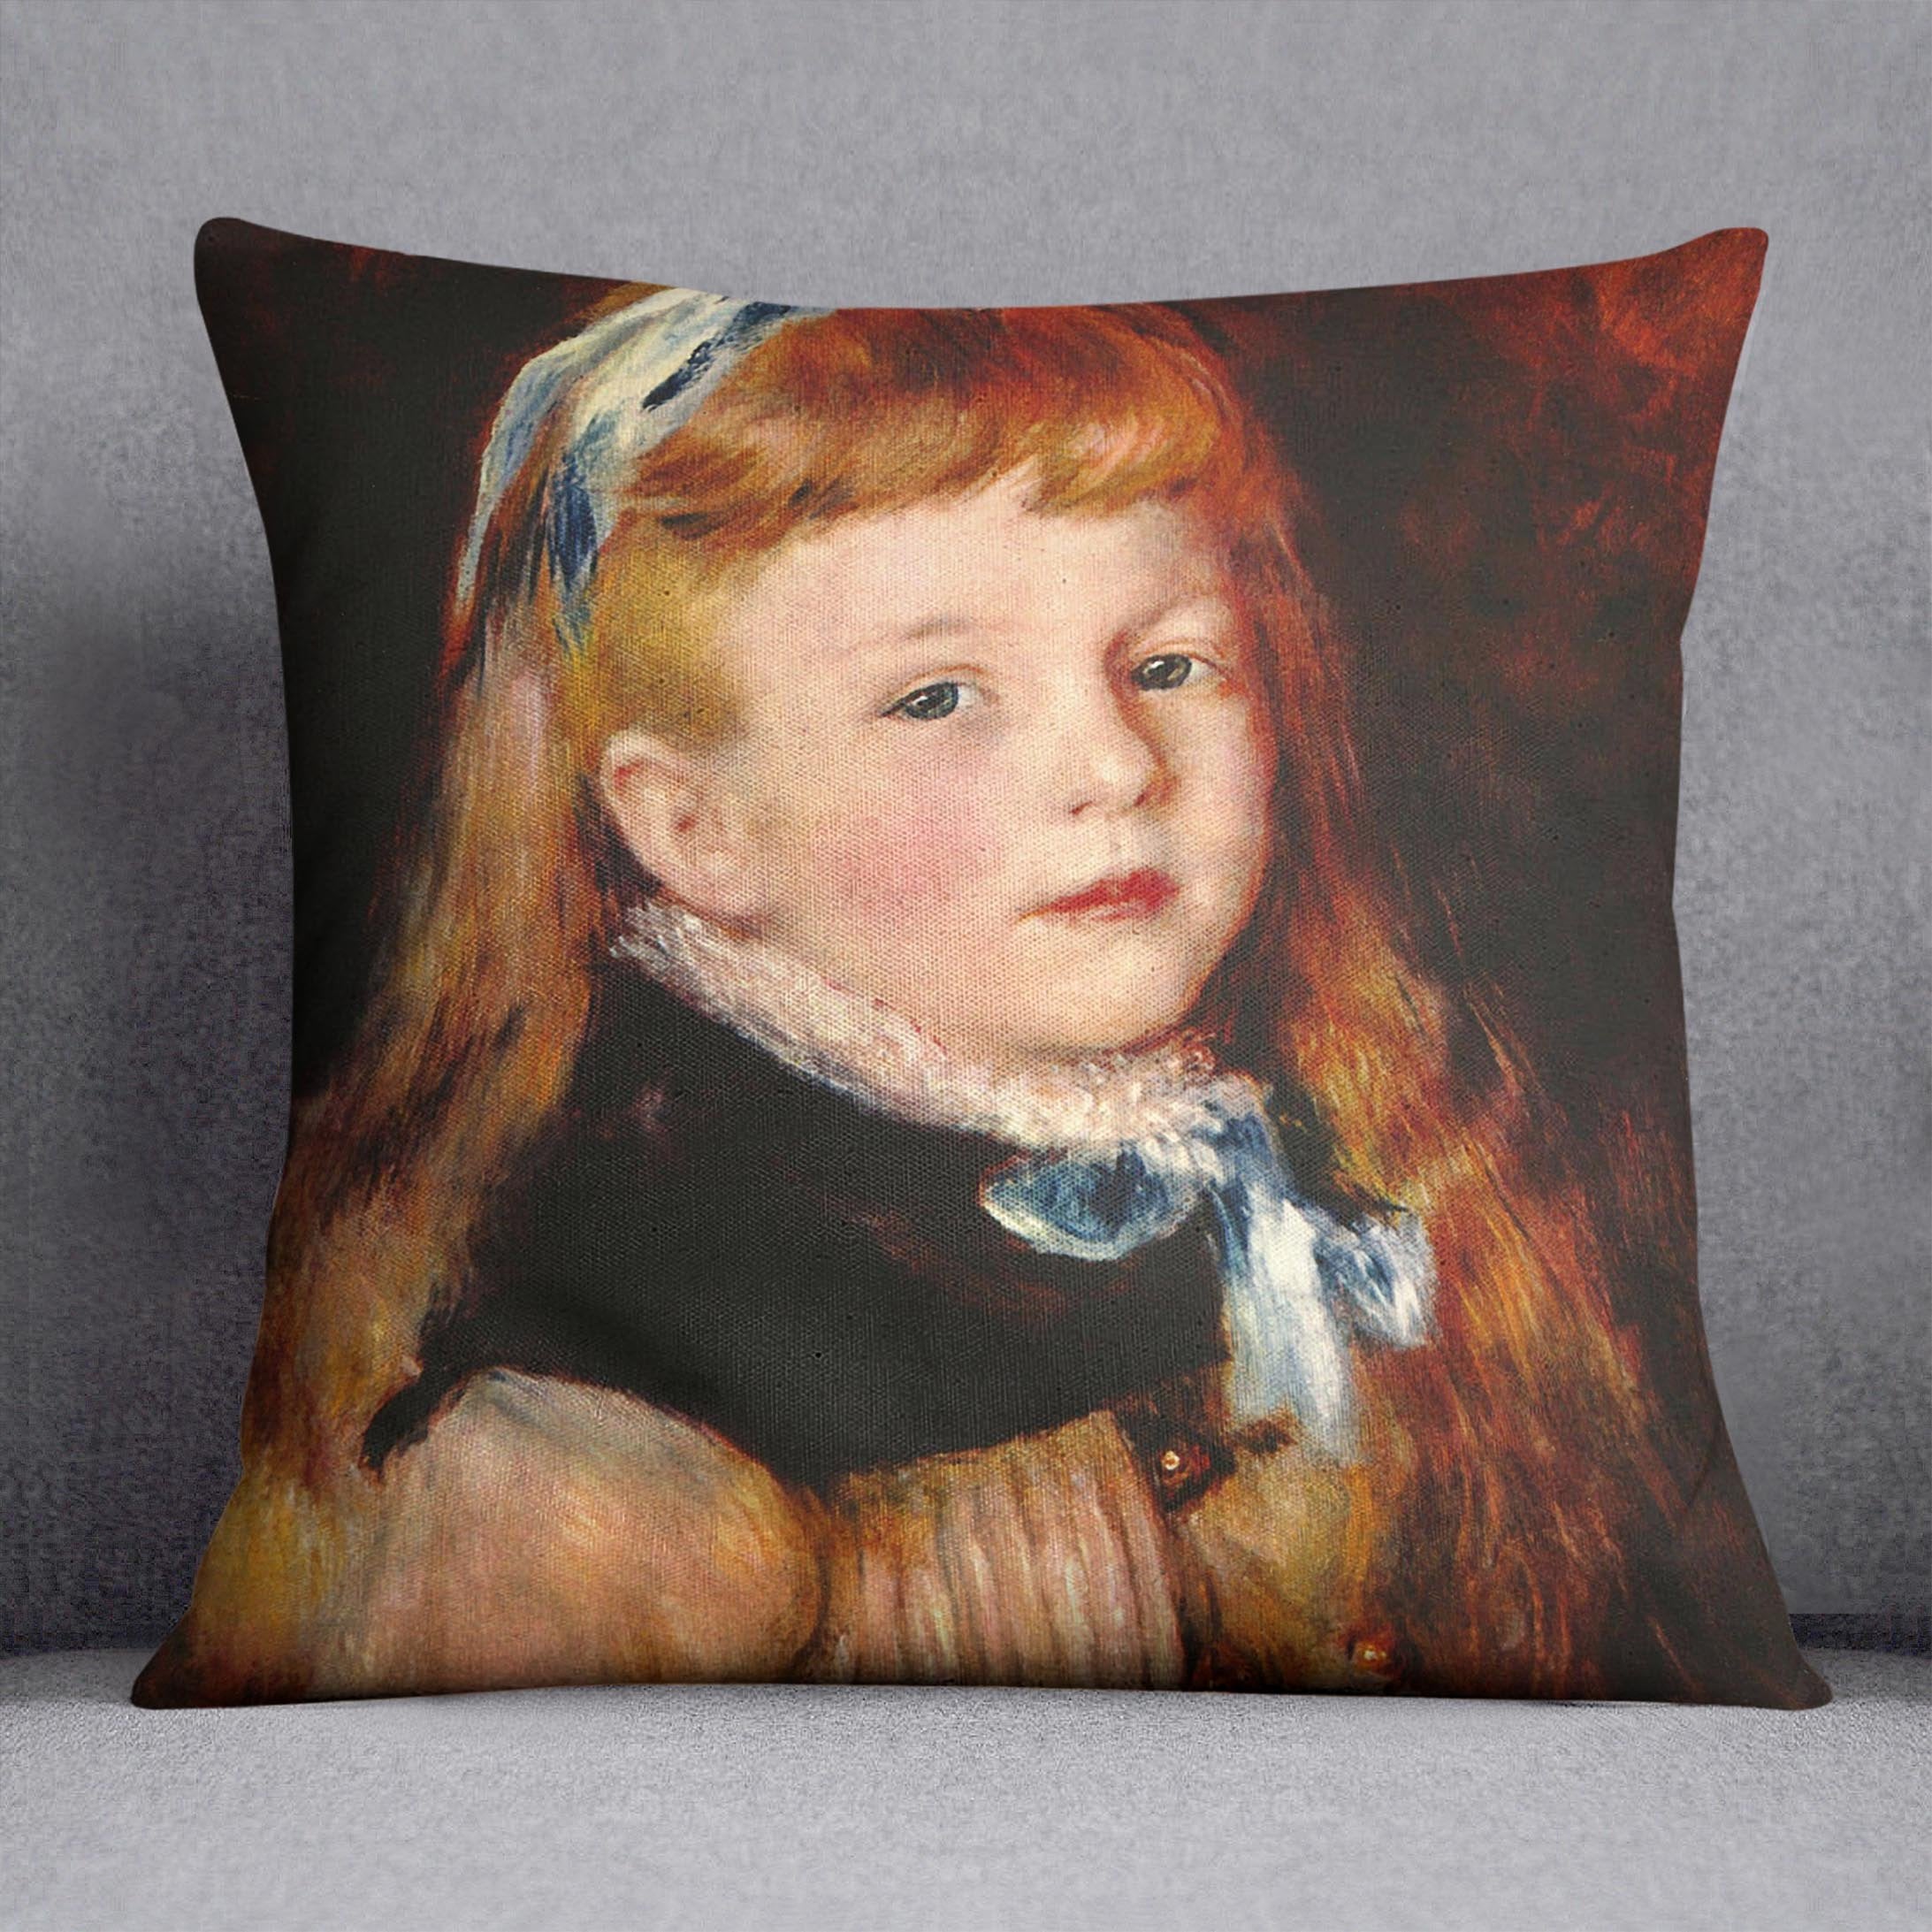 Mademoiselle Grimprel with blue hair band by Renoir Throw Pillow